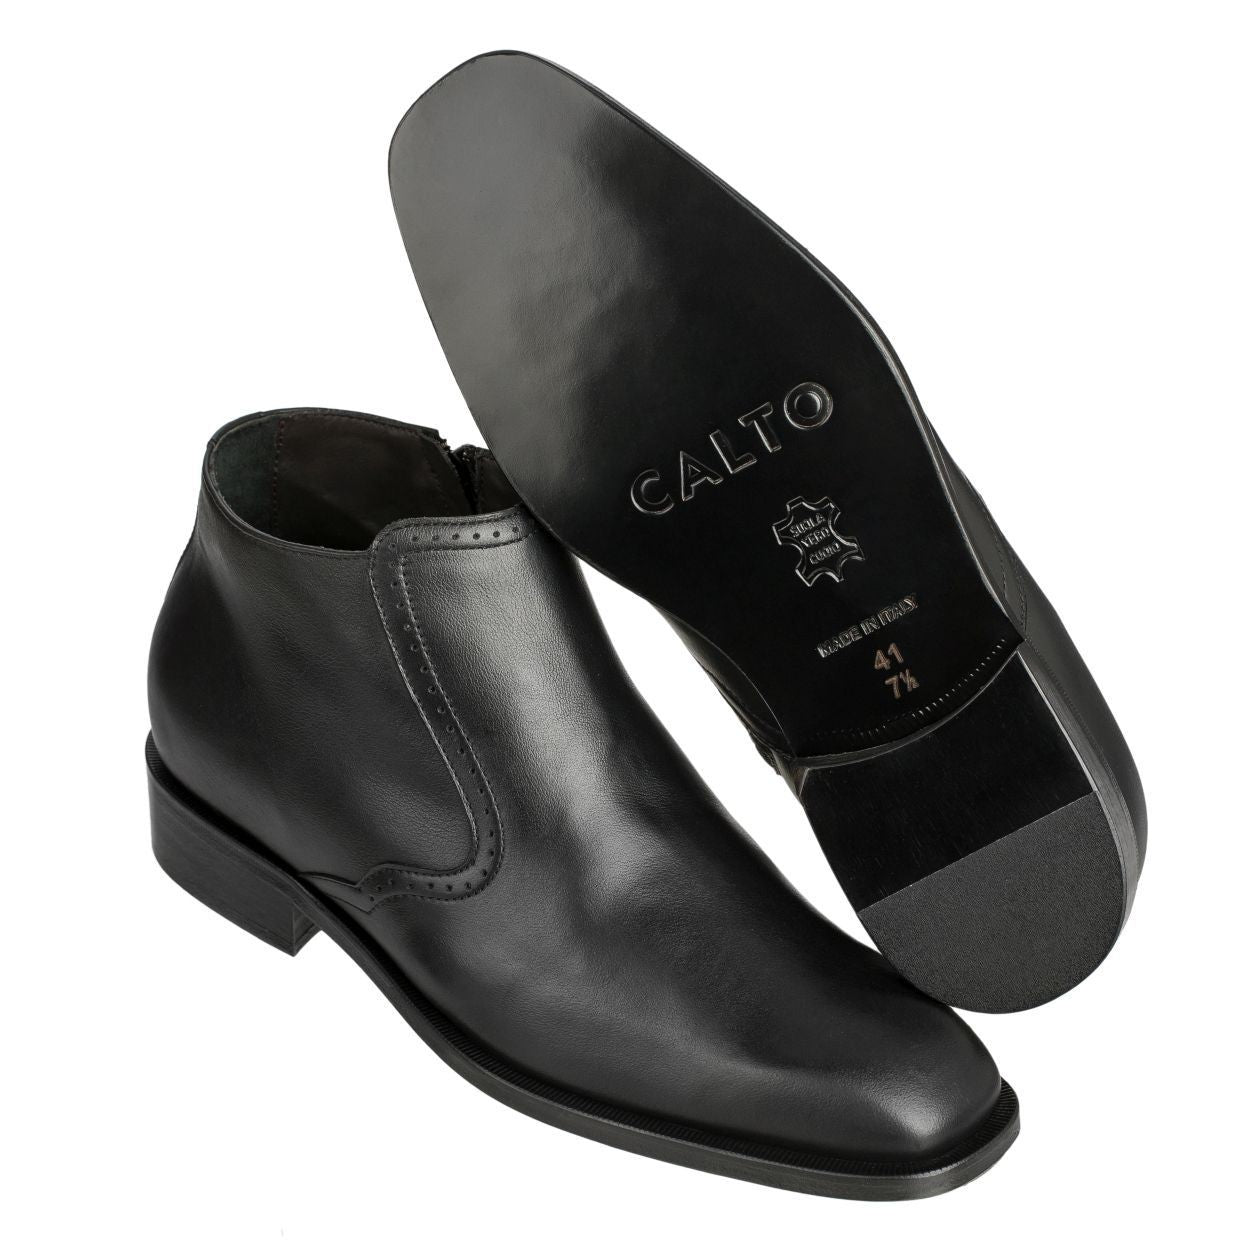 Elevator shoes height increase CALTO - D0227 - 2.6 Inches Taller (Black) - Size 12 Only